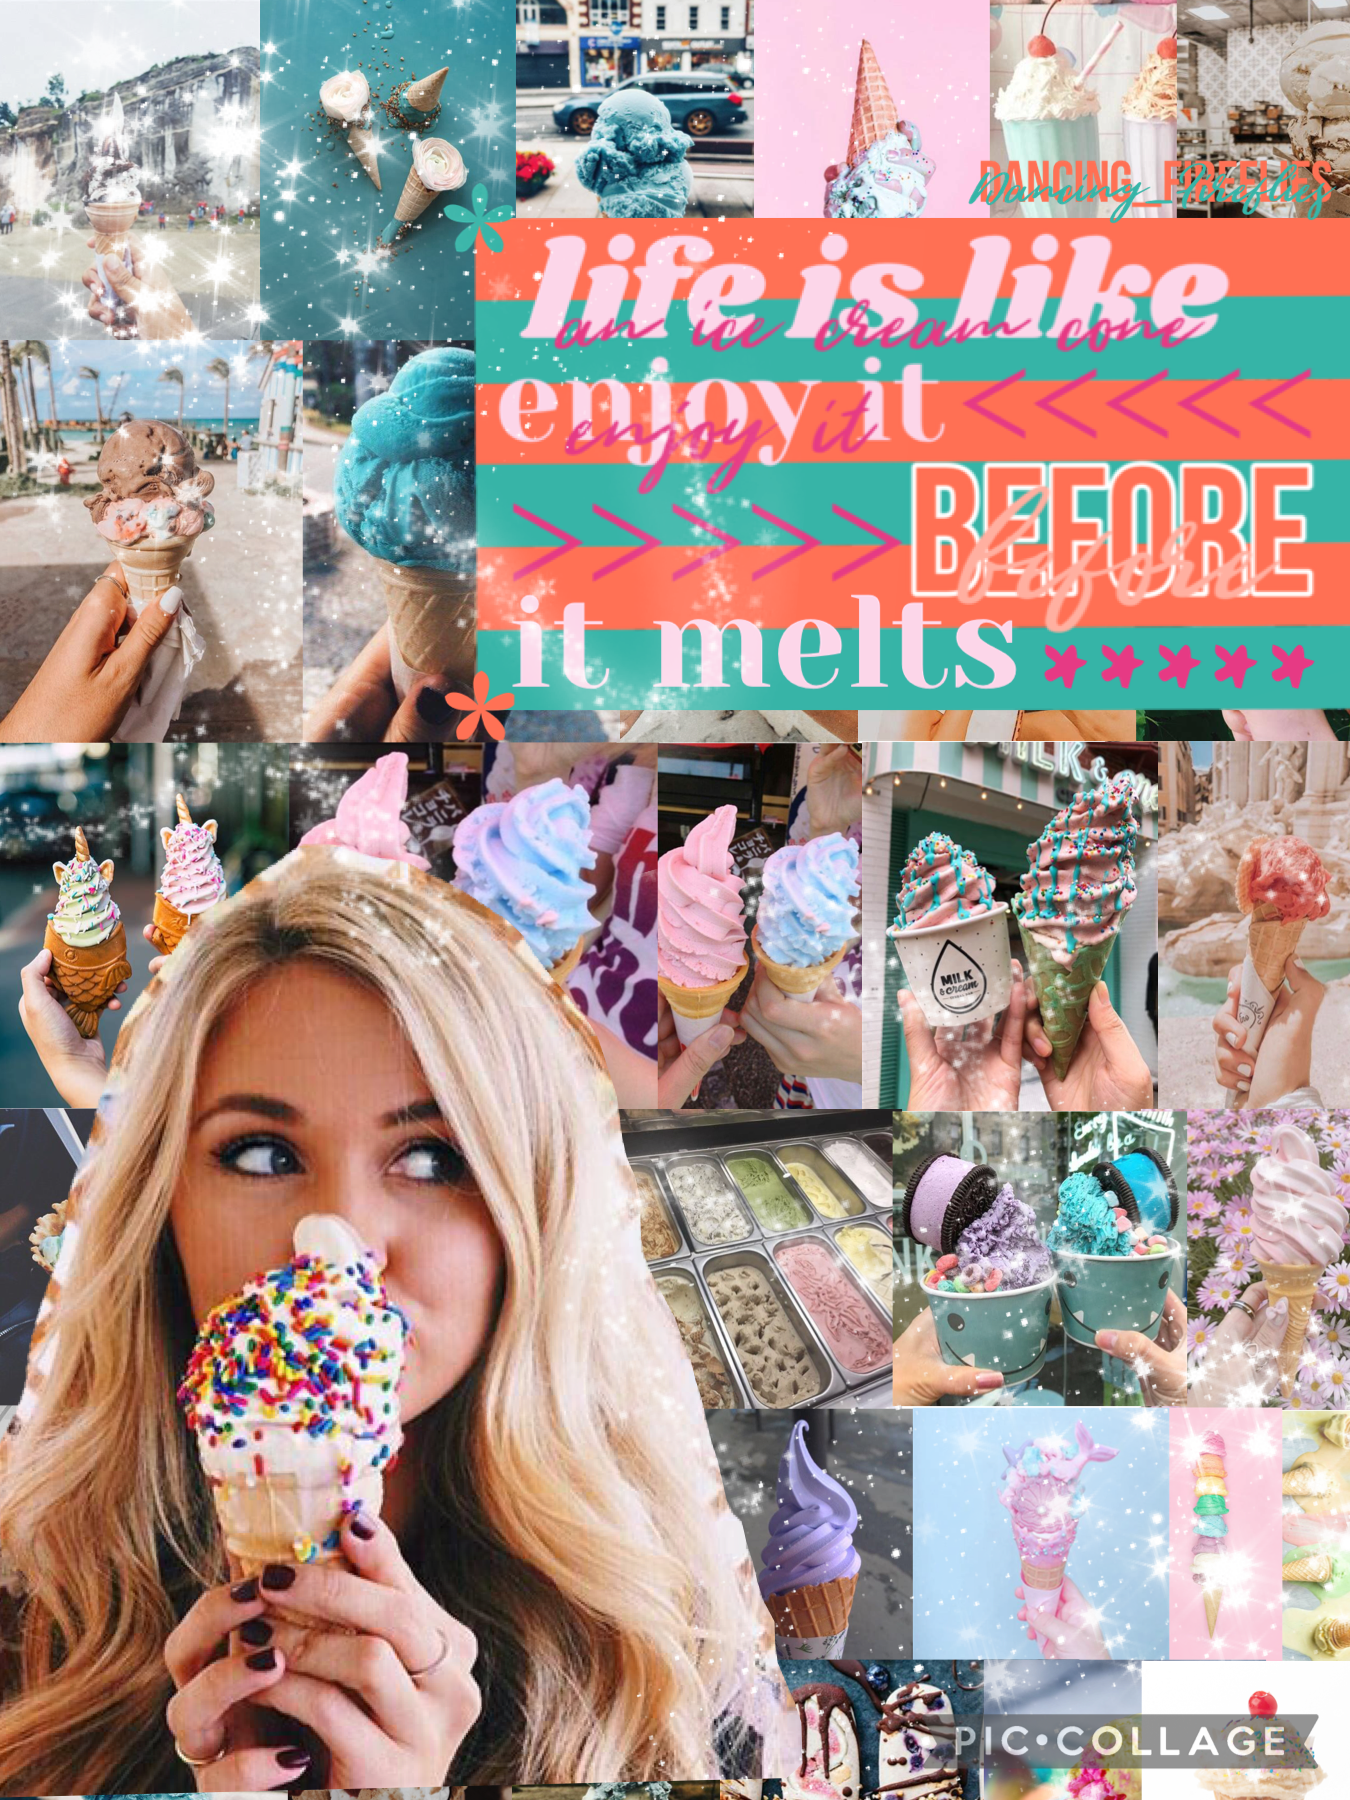 🍦TAP🍦
I can’t wait until my favorite ice cream shop opens! They literally have the best ice cream ever! I am leaving to take a break this Friday! (5/24/21)
Qotd: favorite thing about summer?
Aotd: the ice cream!